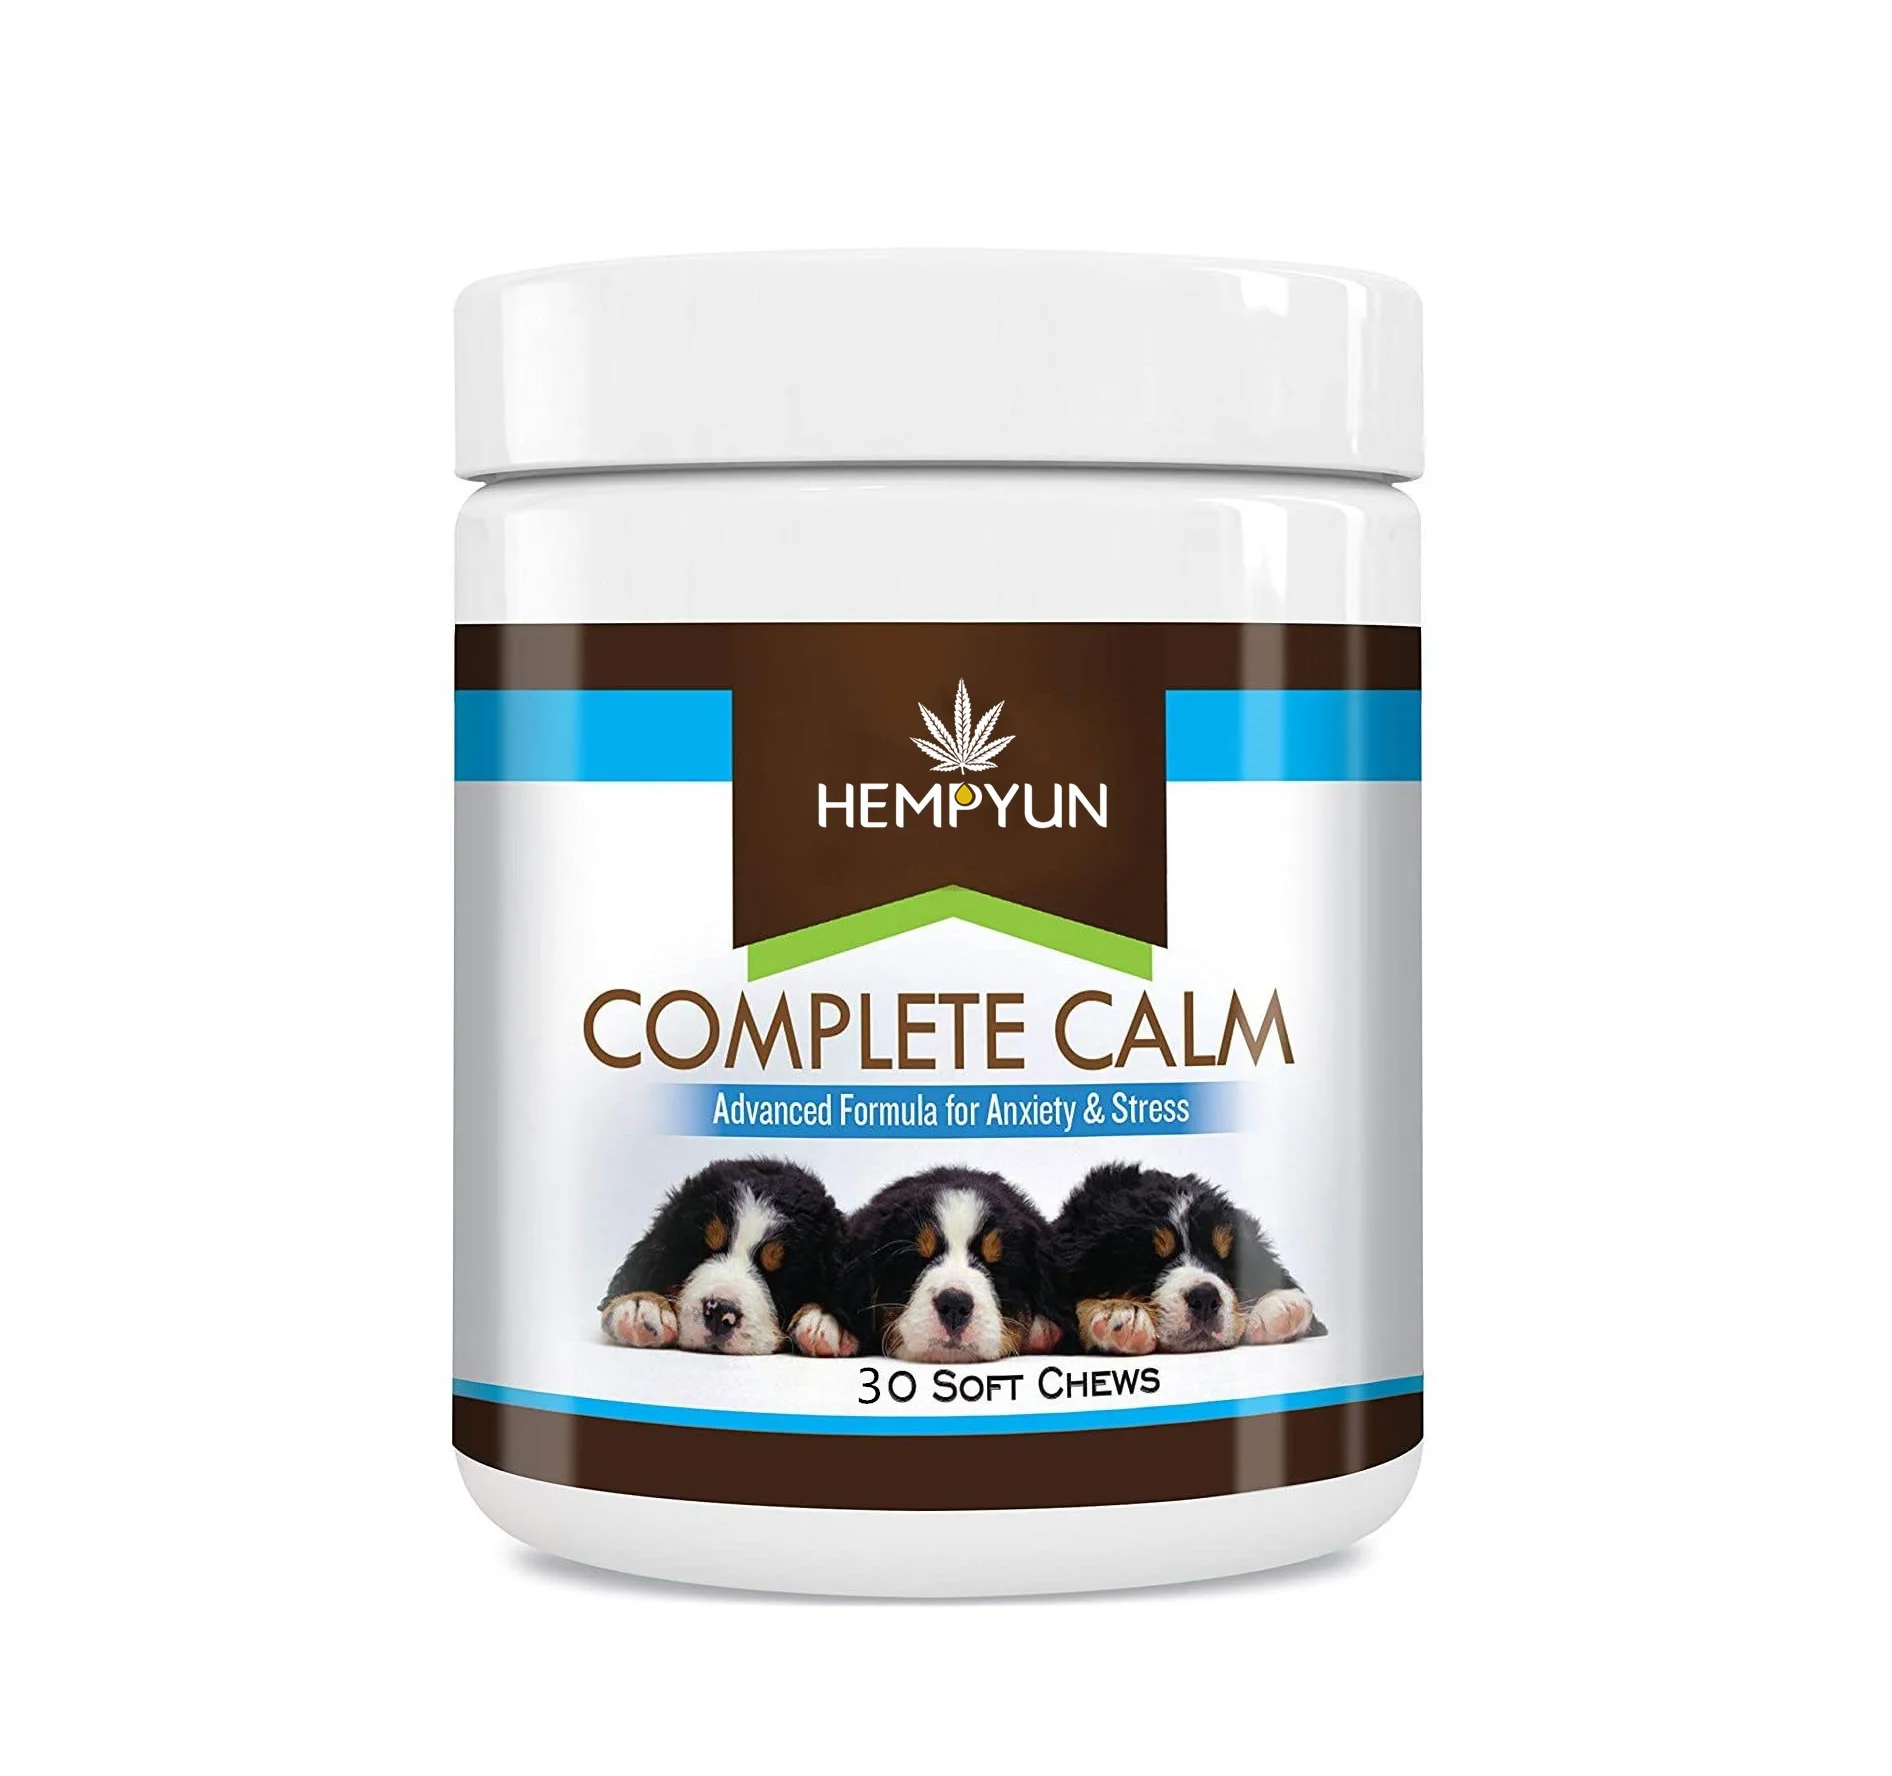 

Hemp Calming Treats for Dogs -Helps With Dog Anxiety, Separation, Barking, Stress Relief, And Thunderstorms